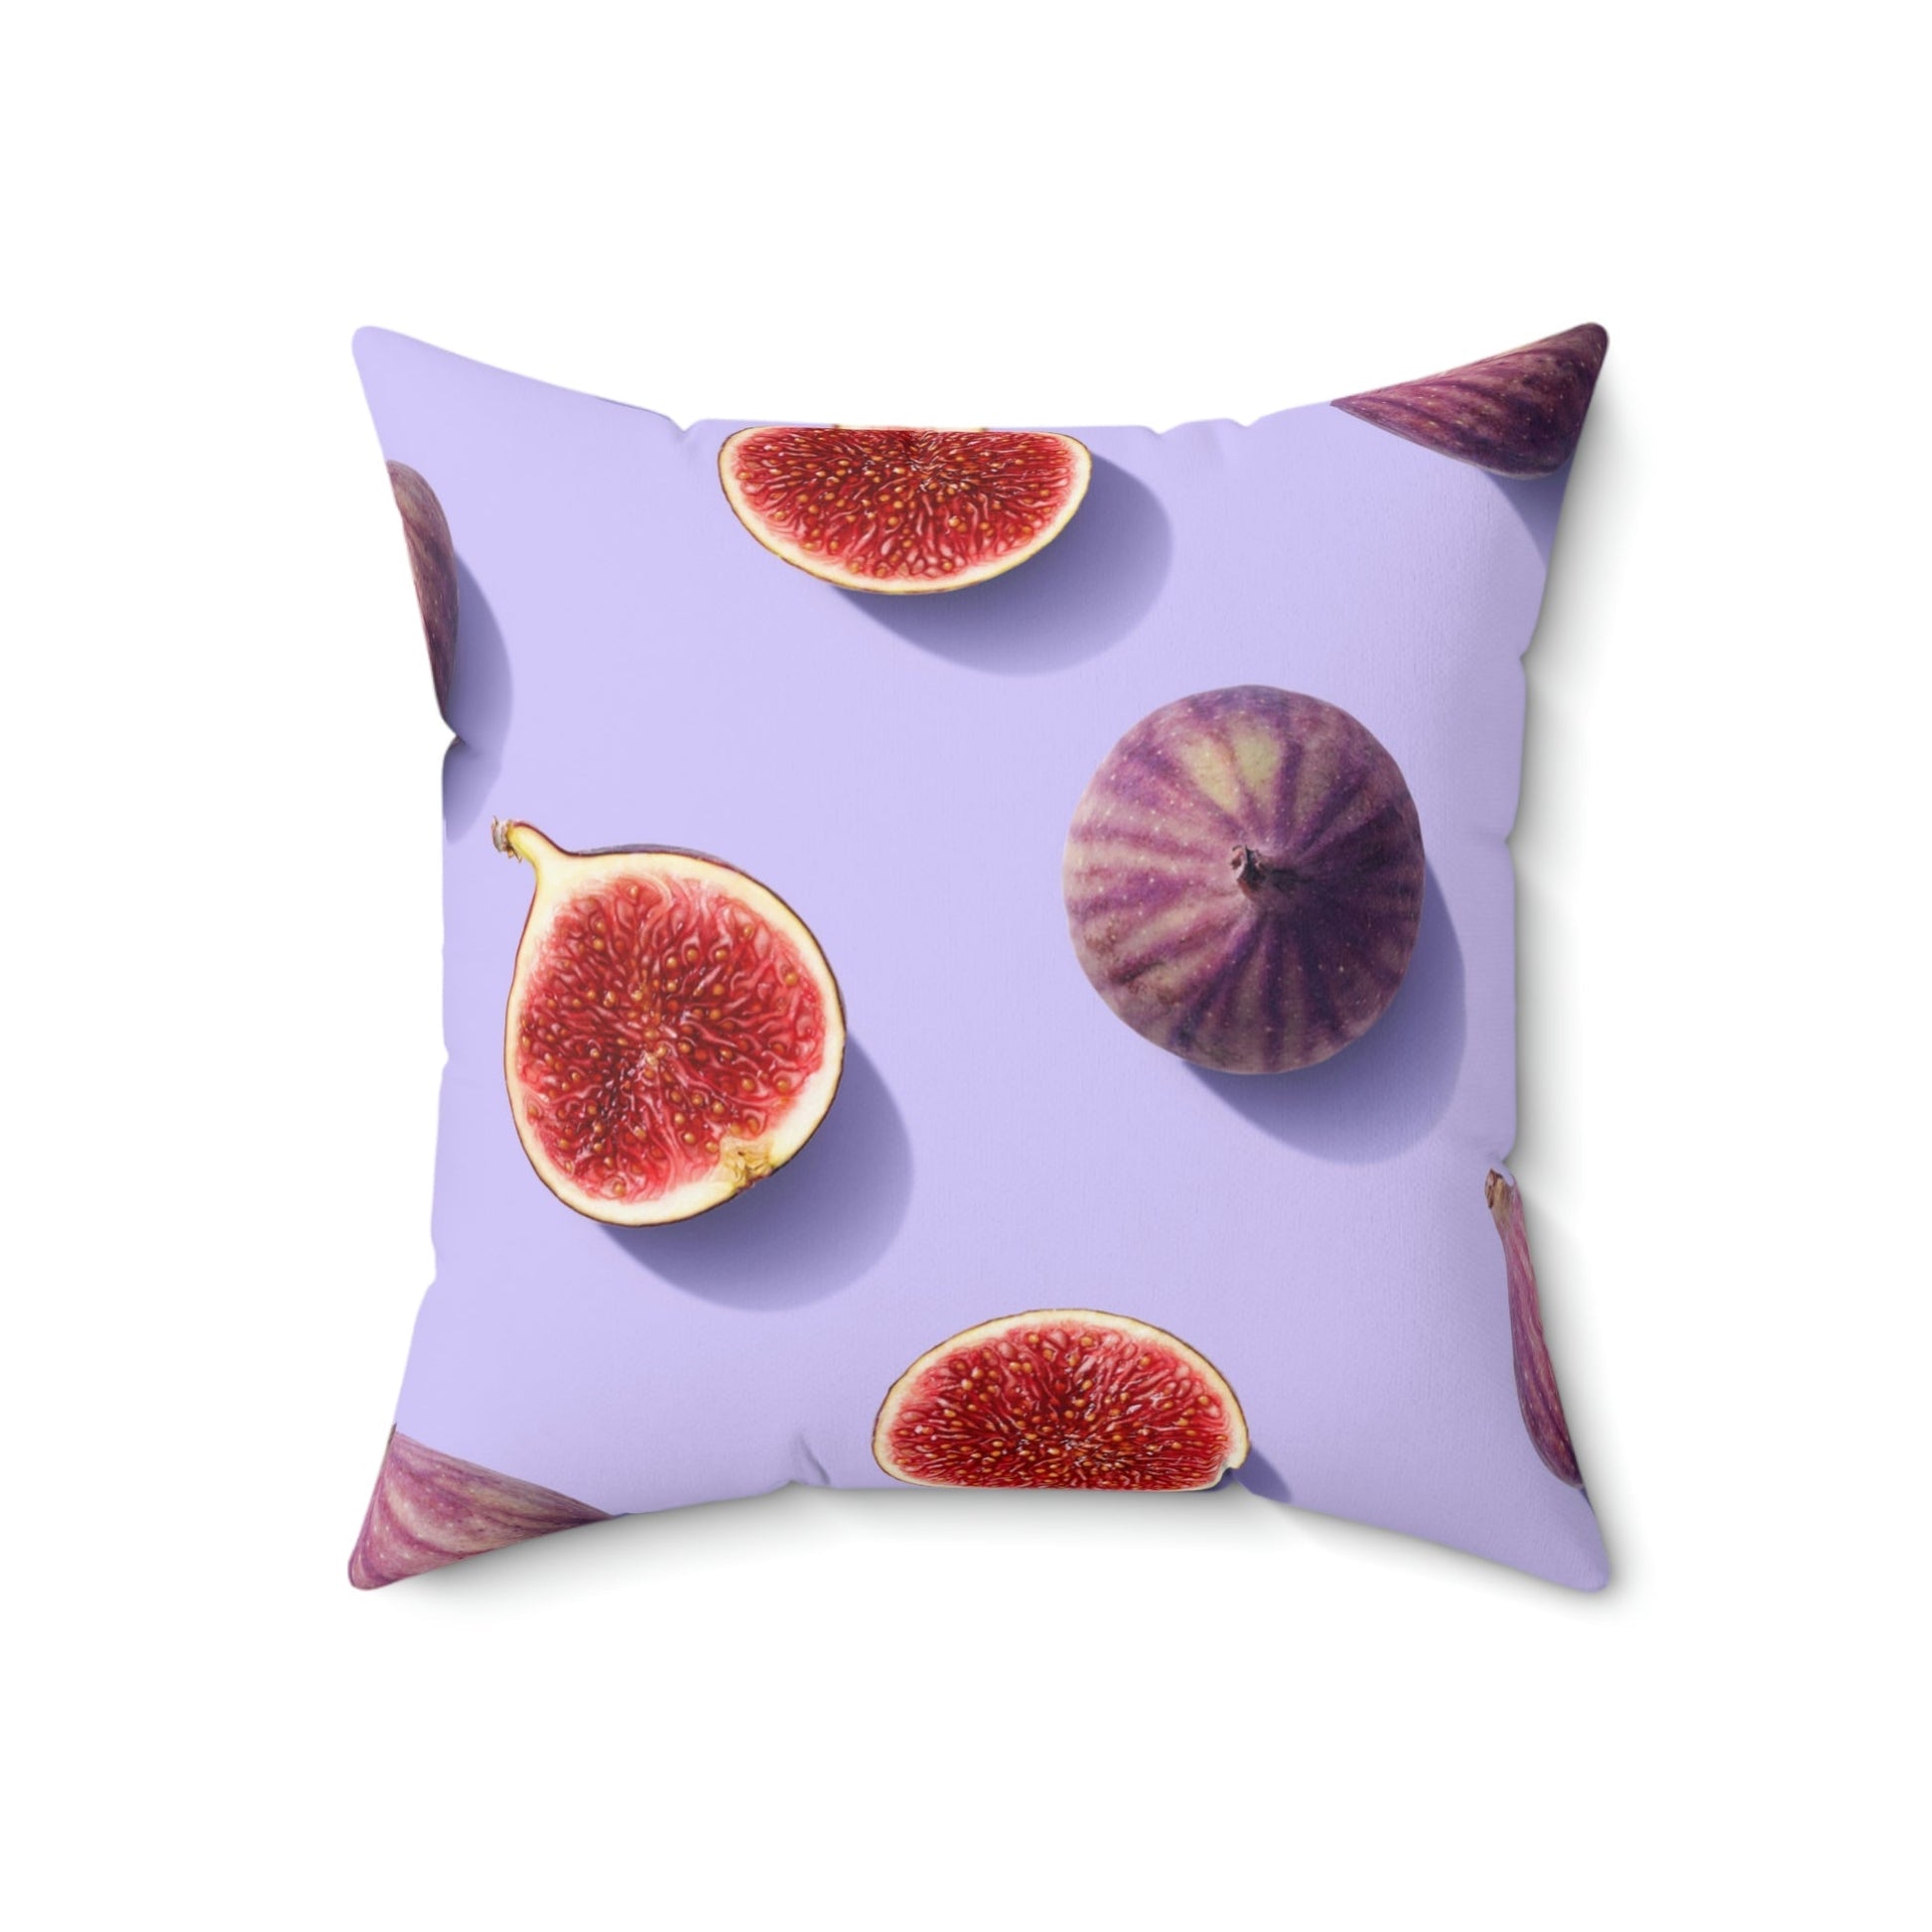 Sweet Like Figs Square Pillow Home Decor Pink Sweetheart